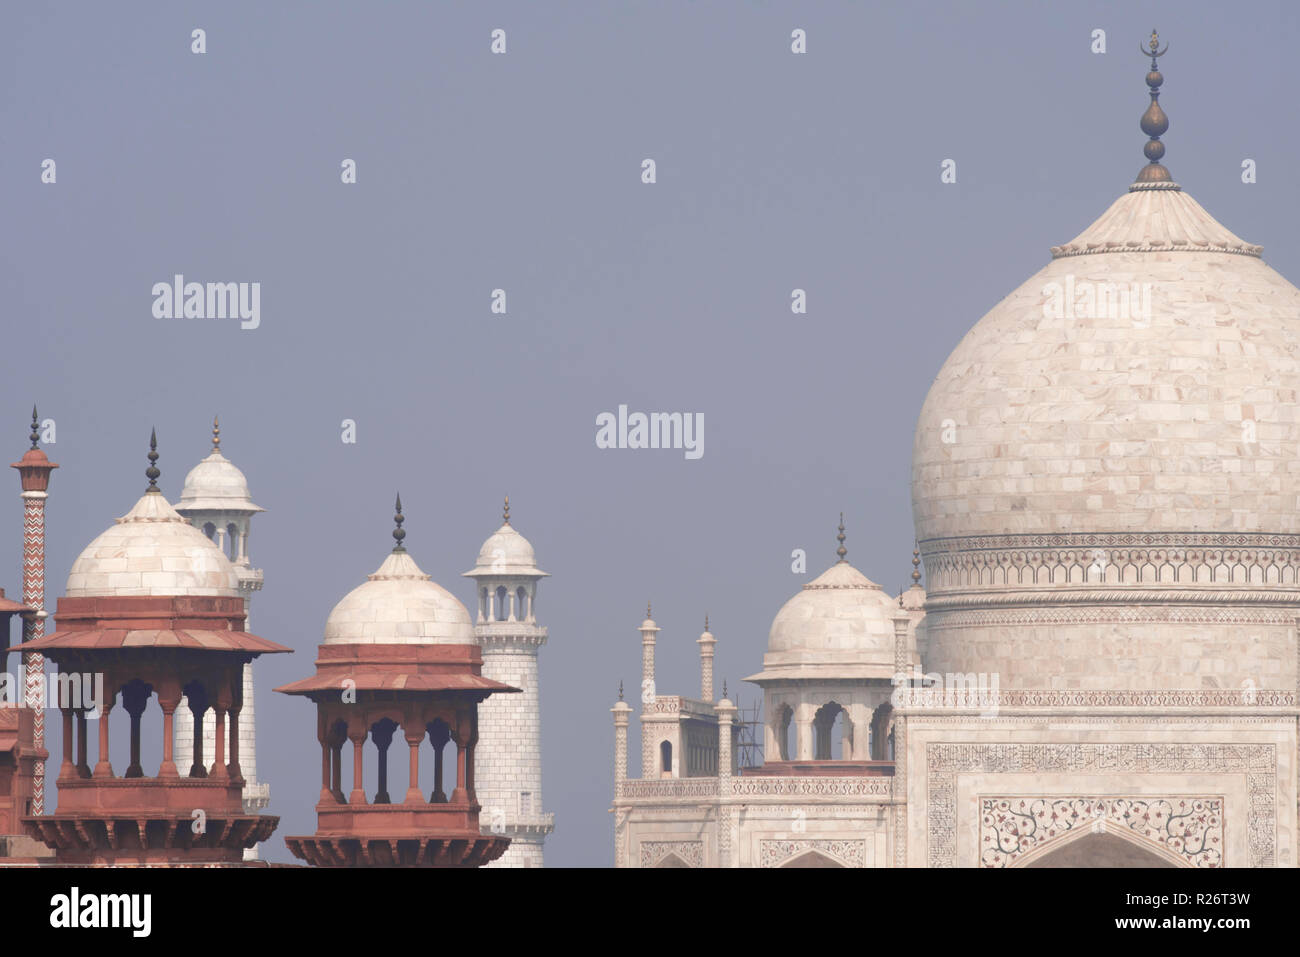 Magnificent Taj Mahal the wonder of the world the dream and pride of India made of white marble with its main dome and other small domes and minarets Stock Photo